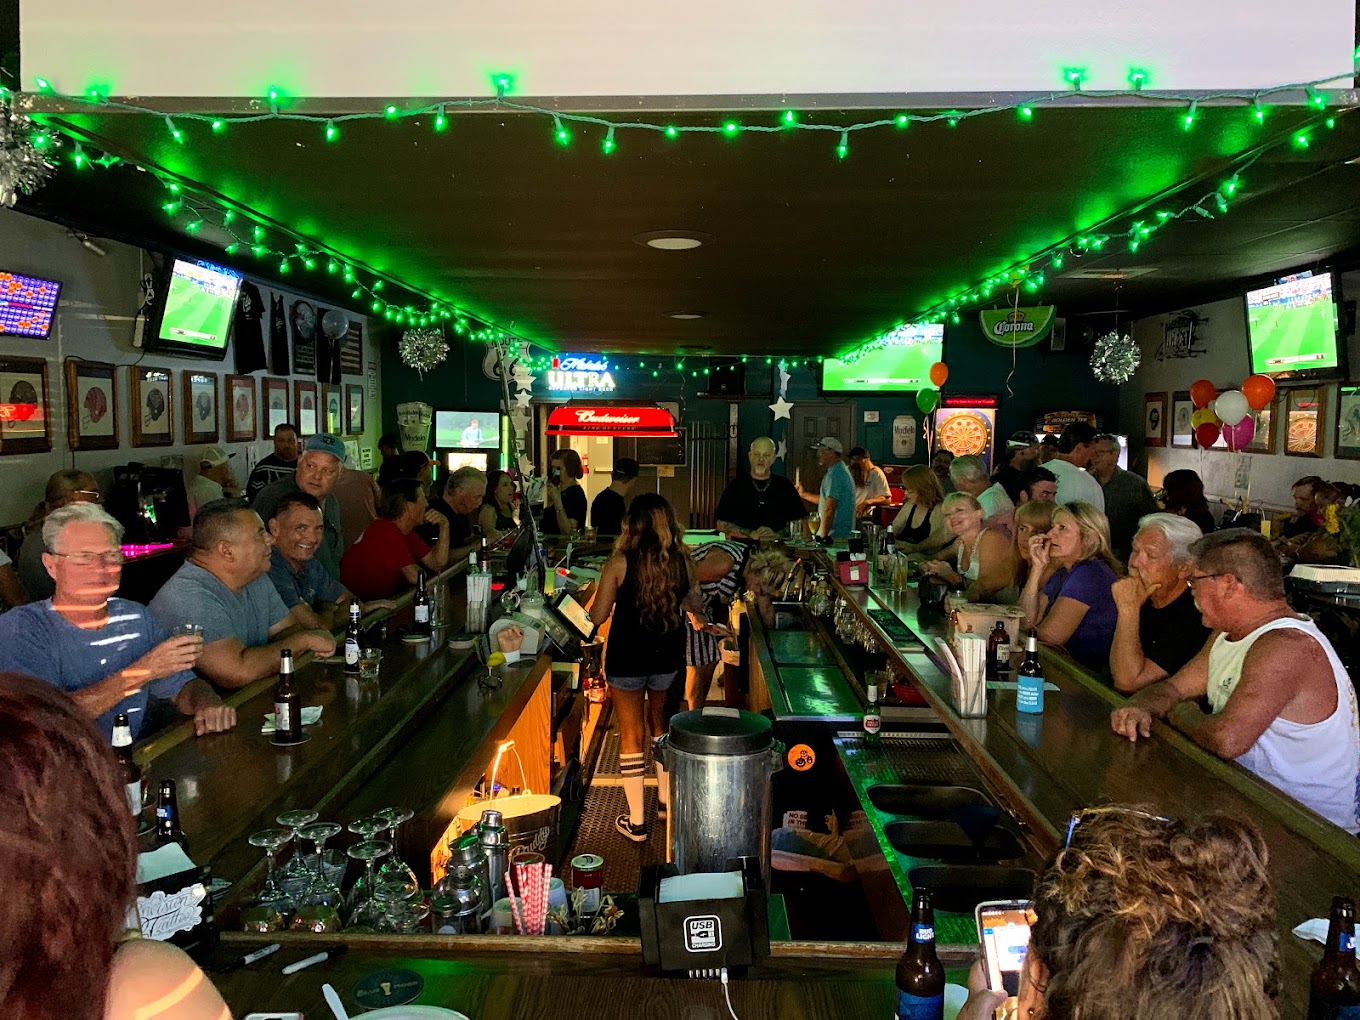 another angle of a full bar with people enjoying drinks and a game on tv